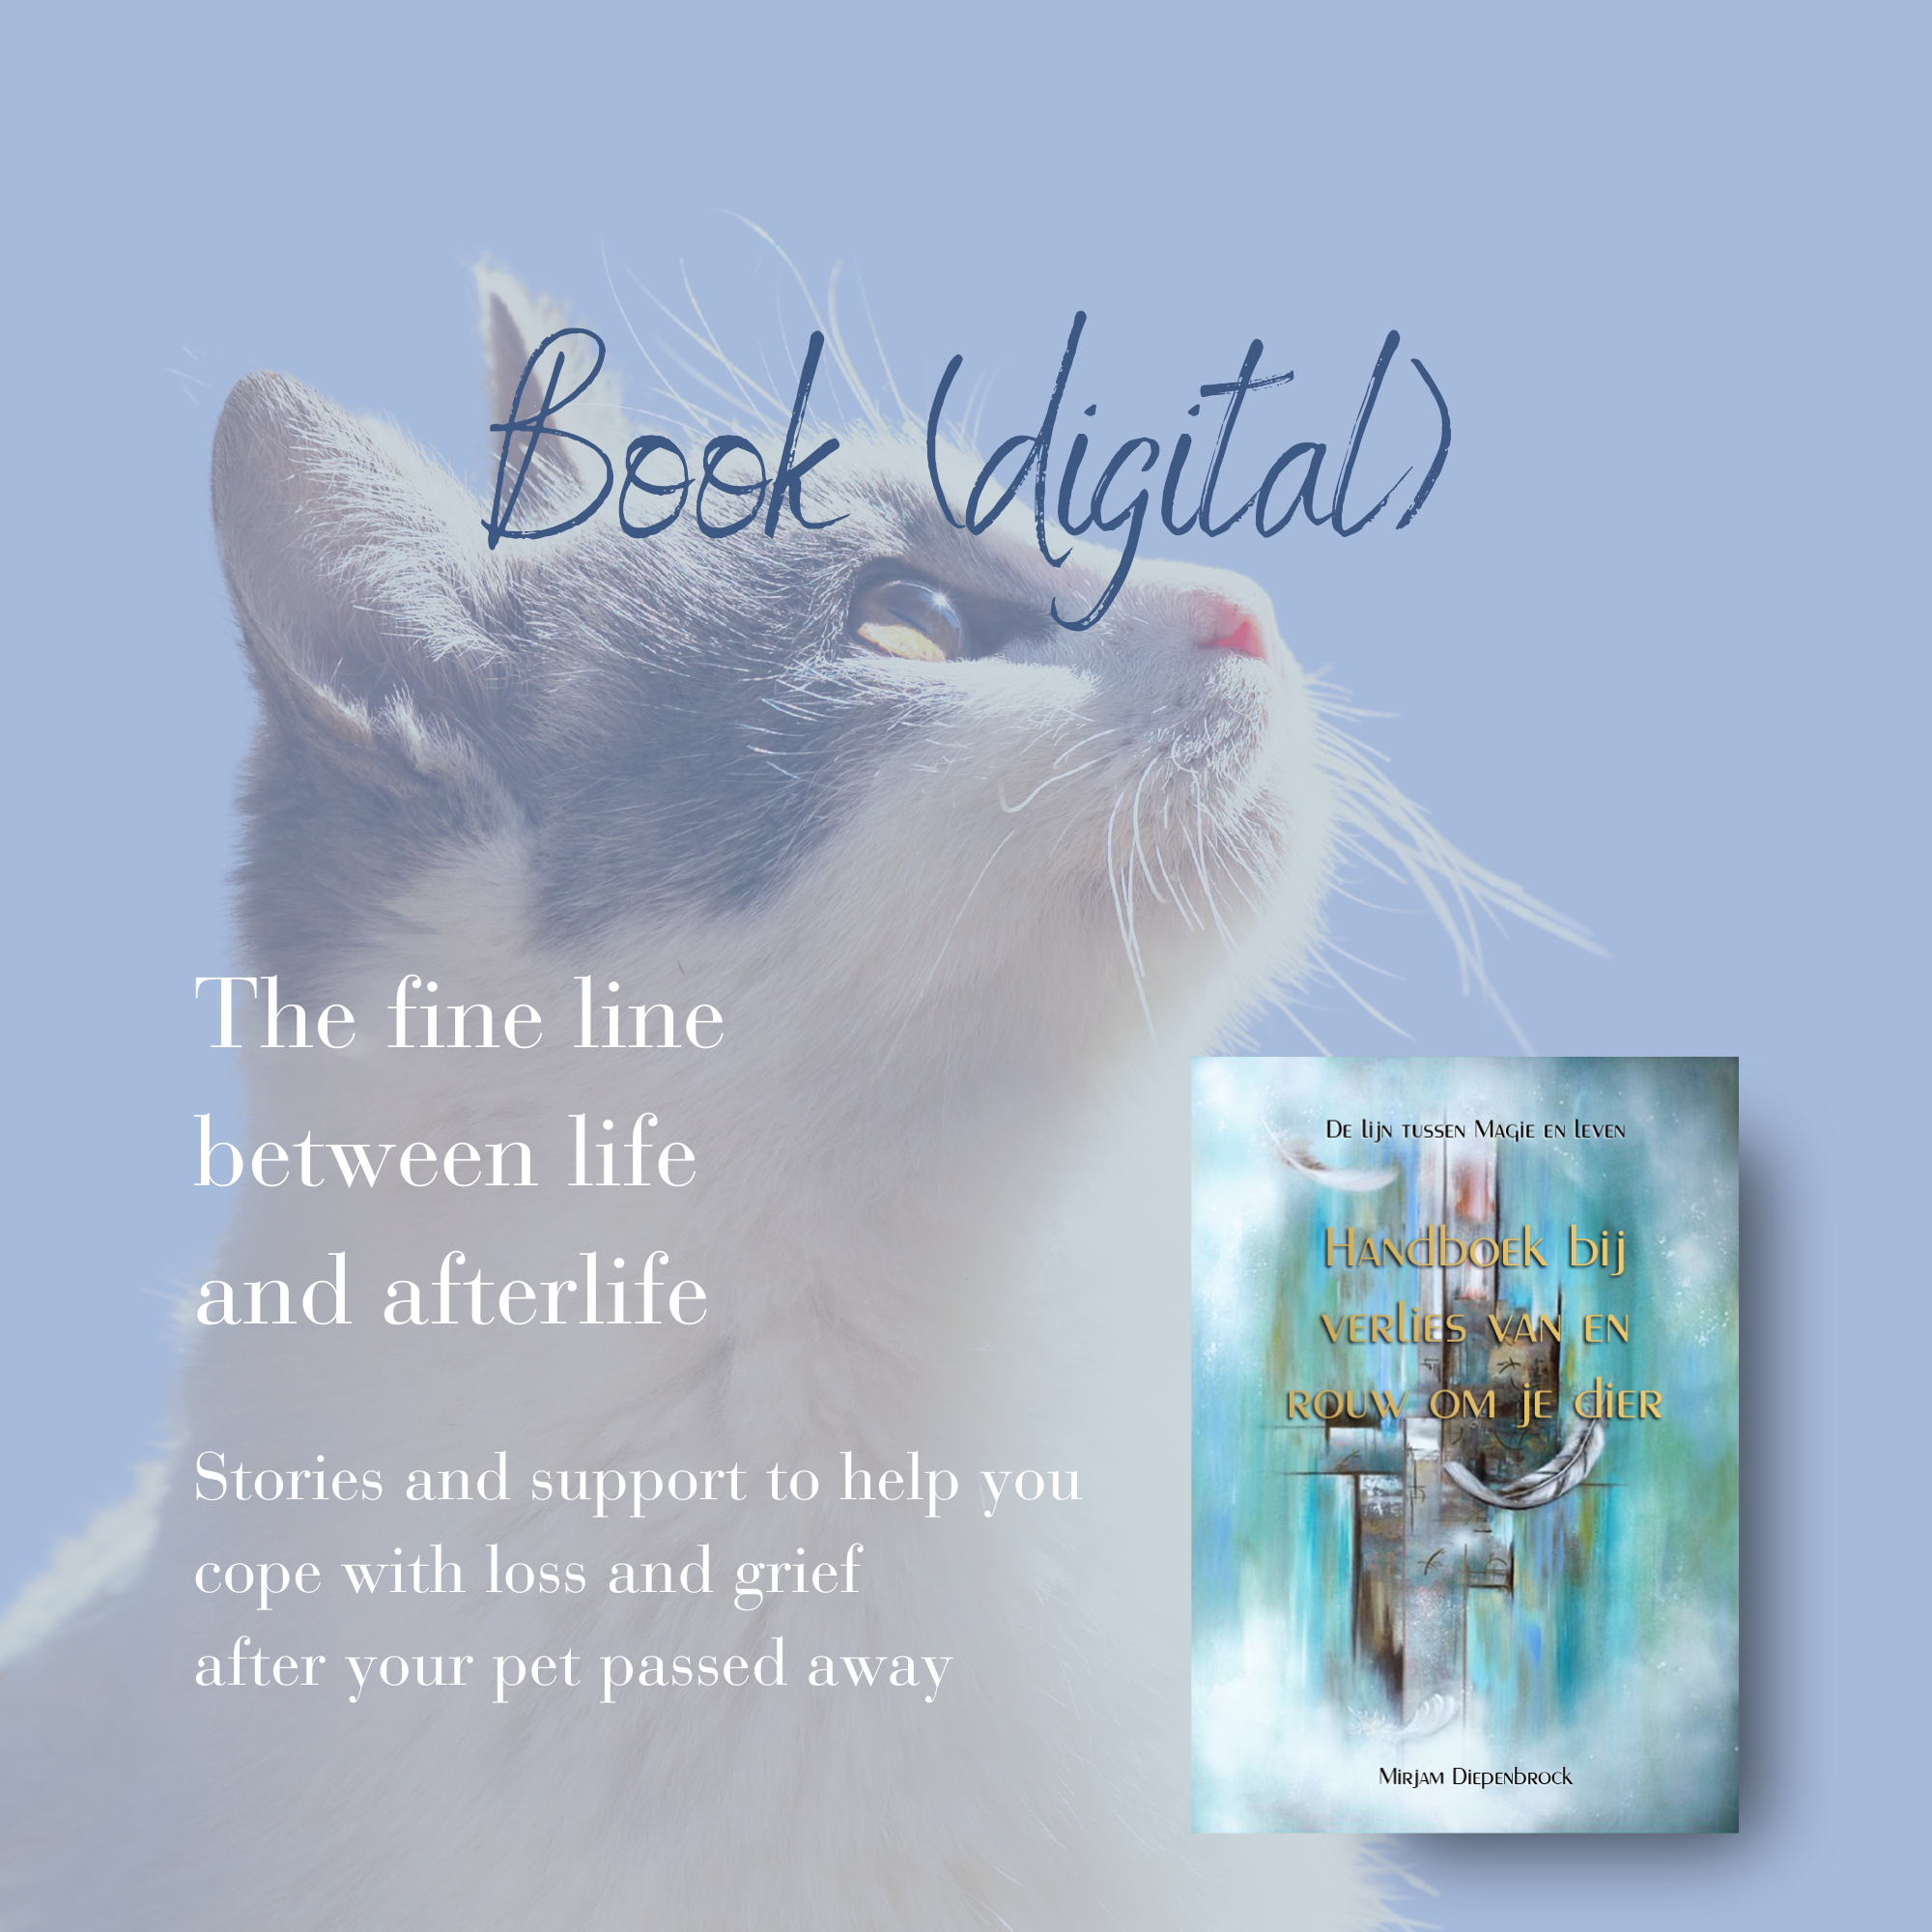 Book Animals in the afterlife, grief pet